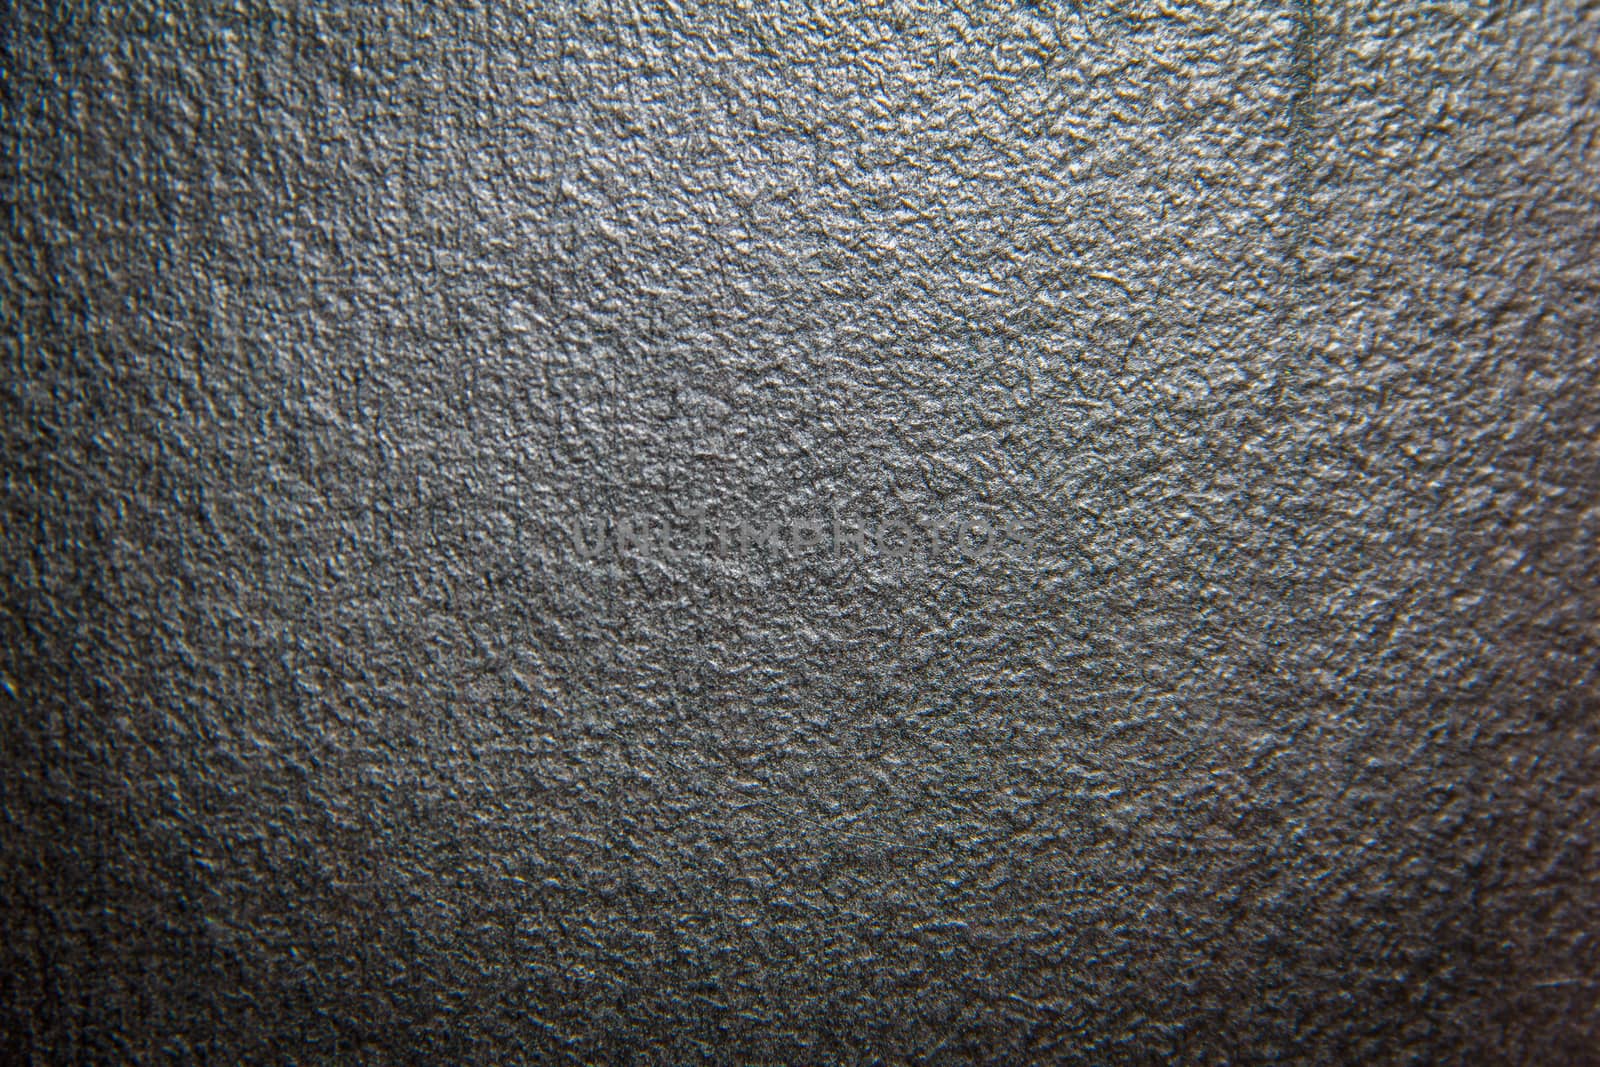 The texture of cement wall